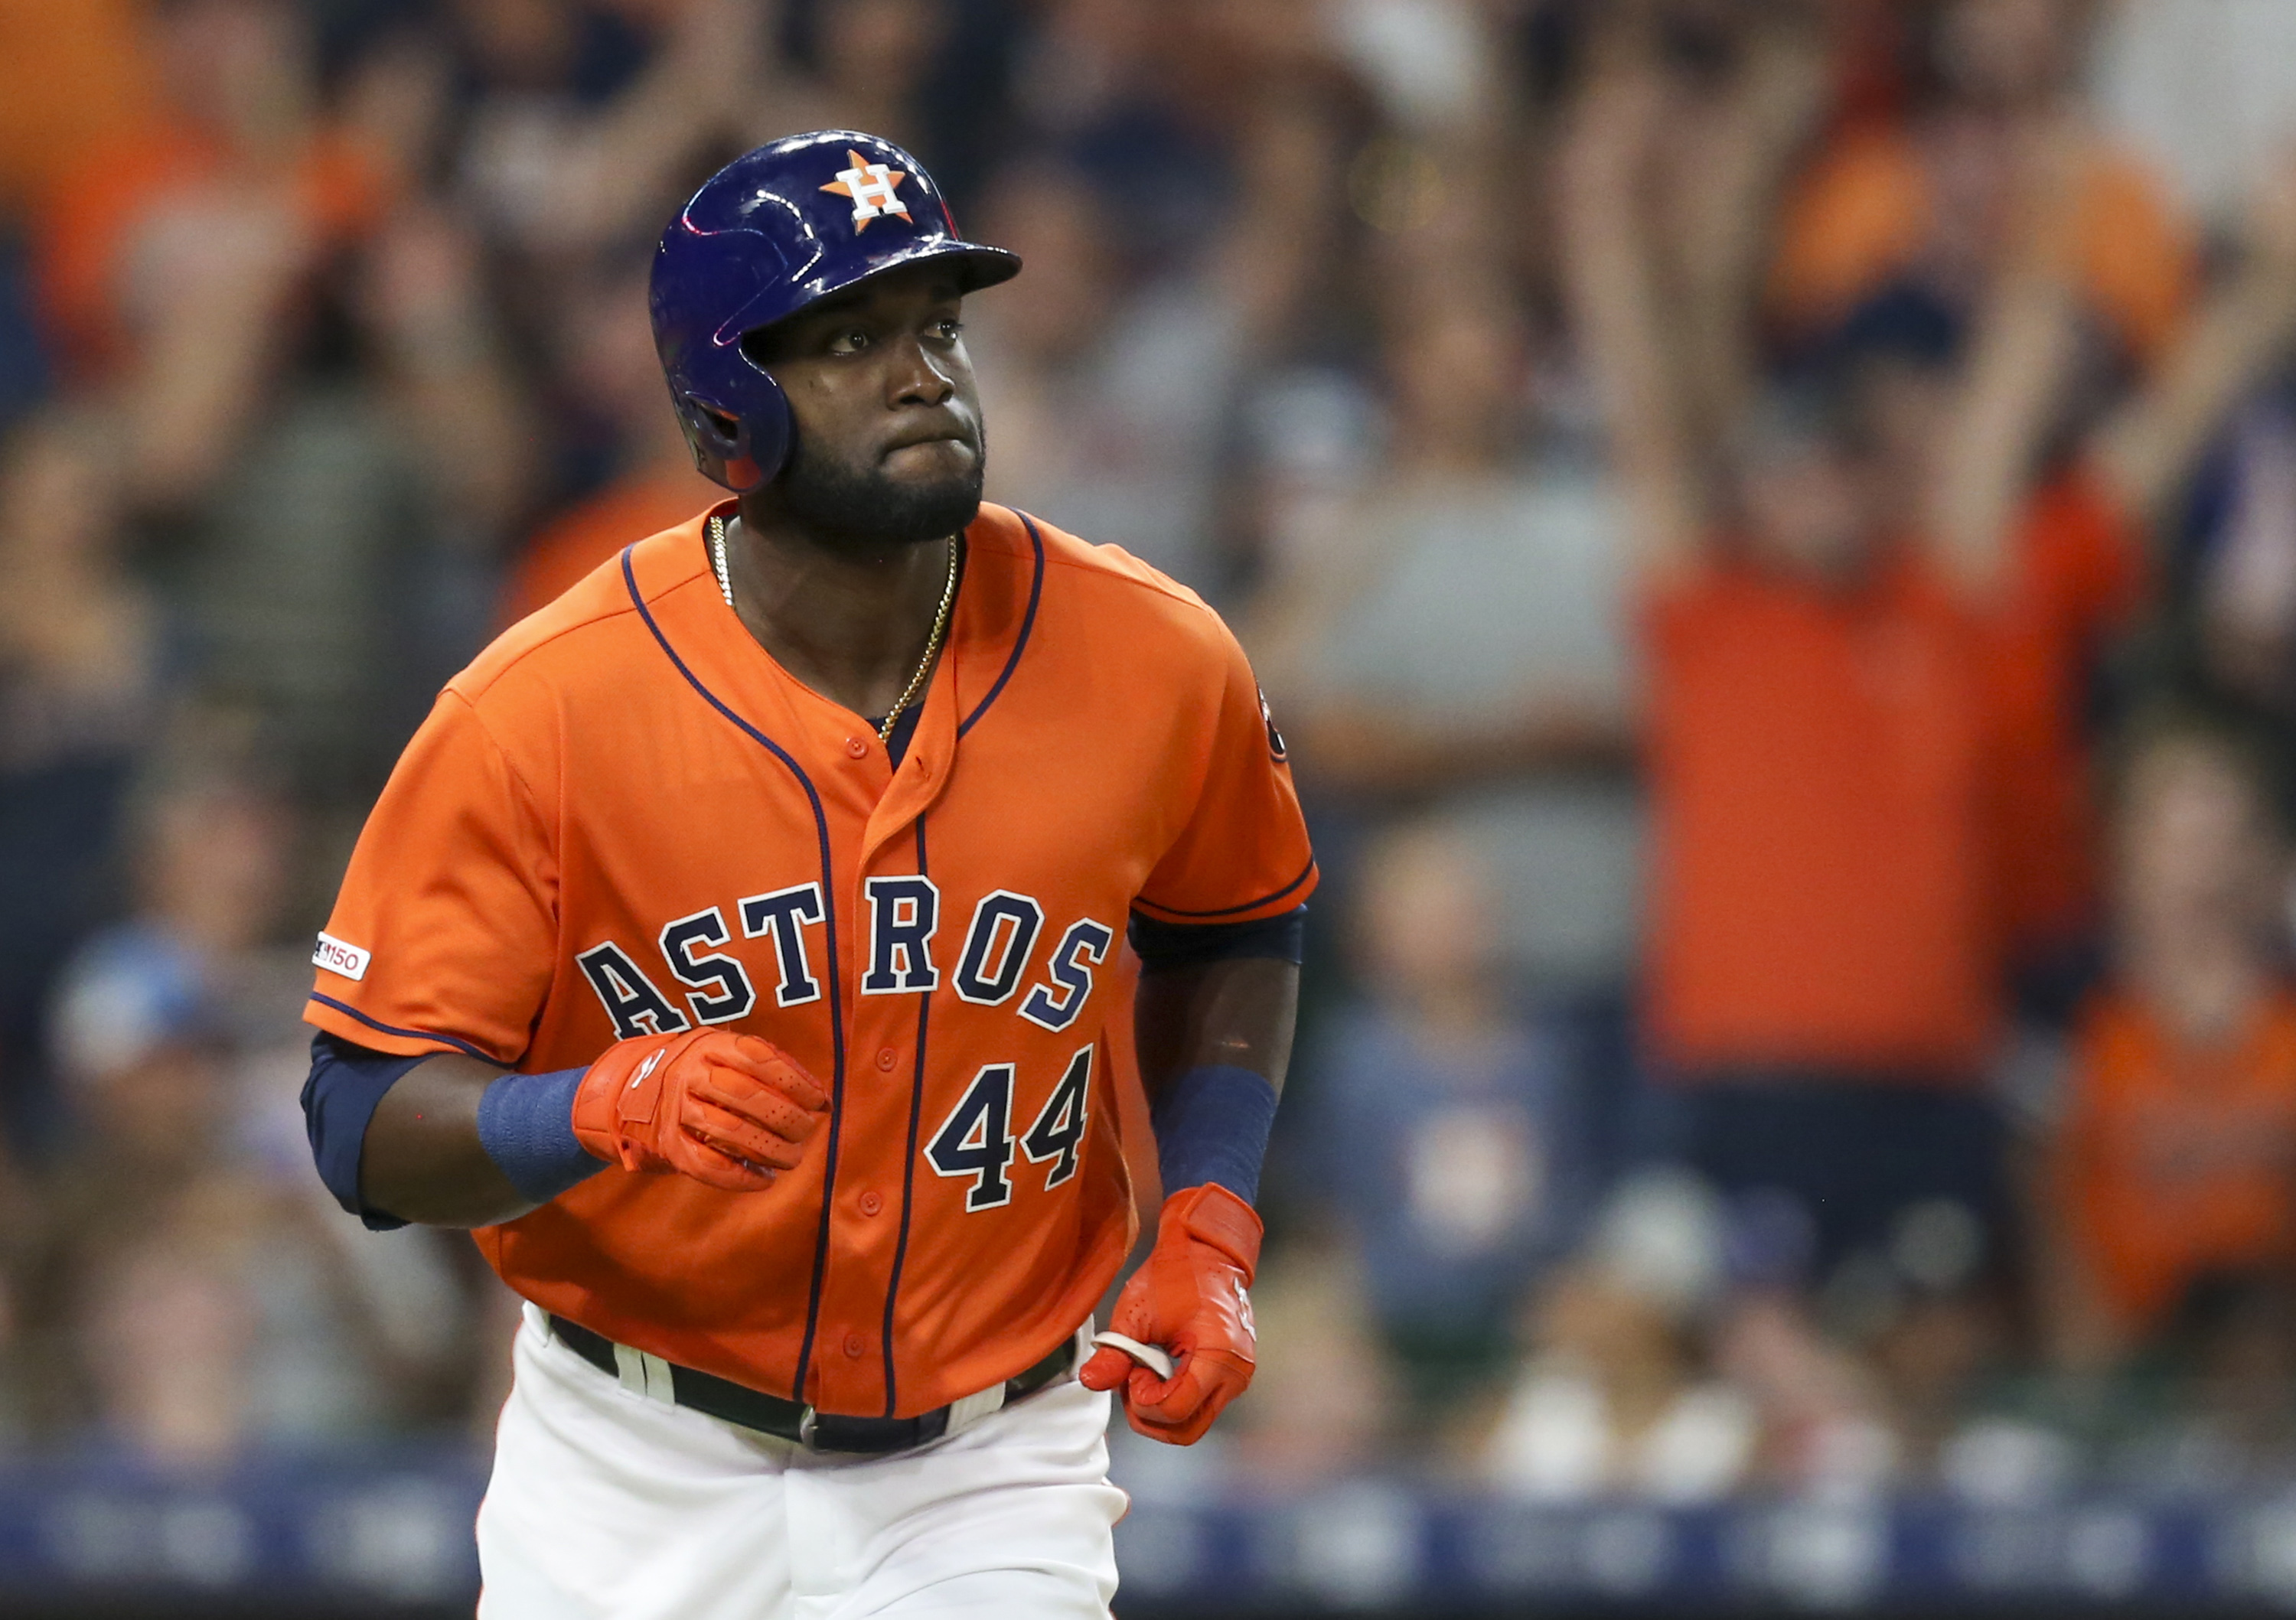 Yordan Alvarez sets MLB record for most RBIs after first 30 games The